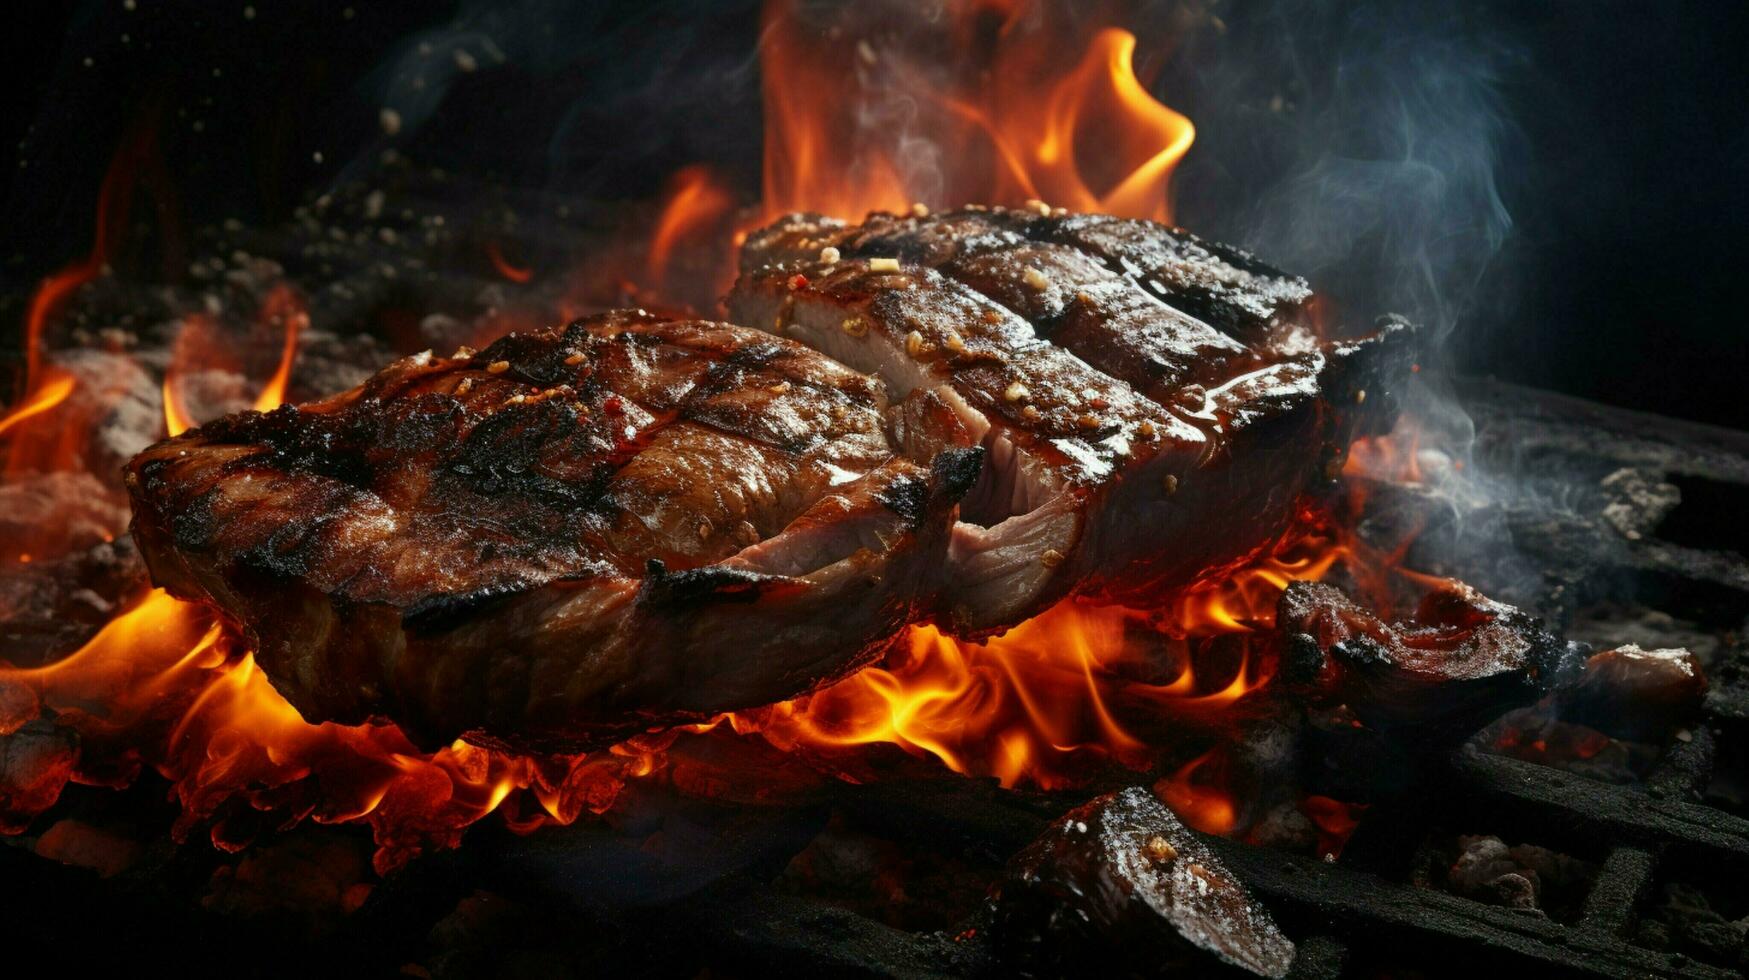 flame grilled meat cooking on flames photo